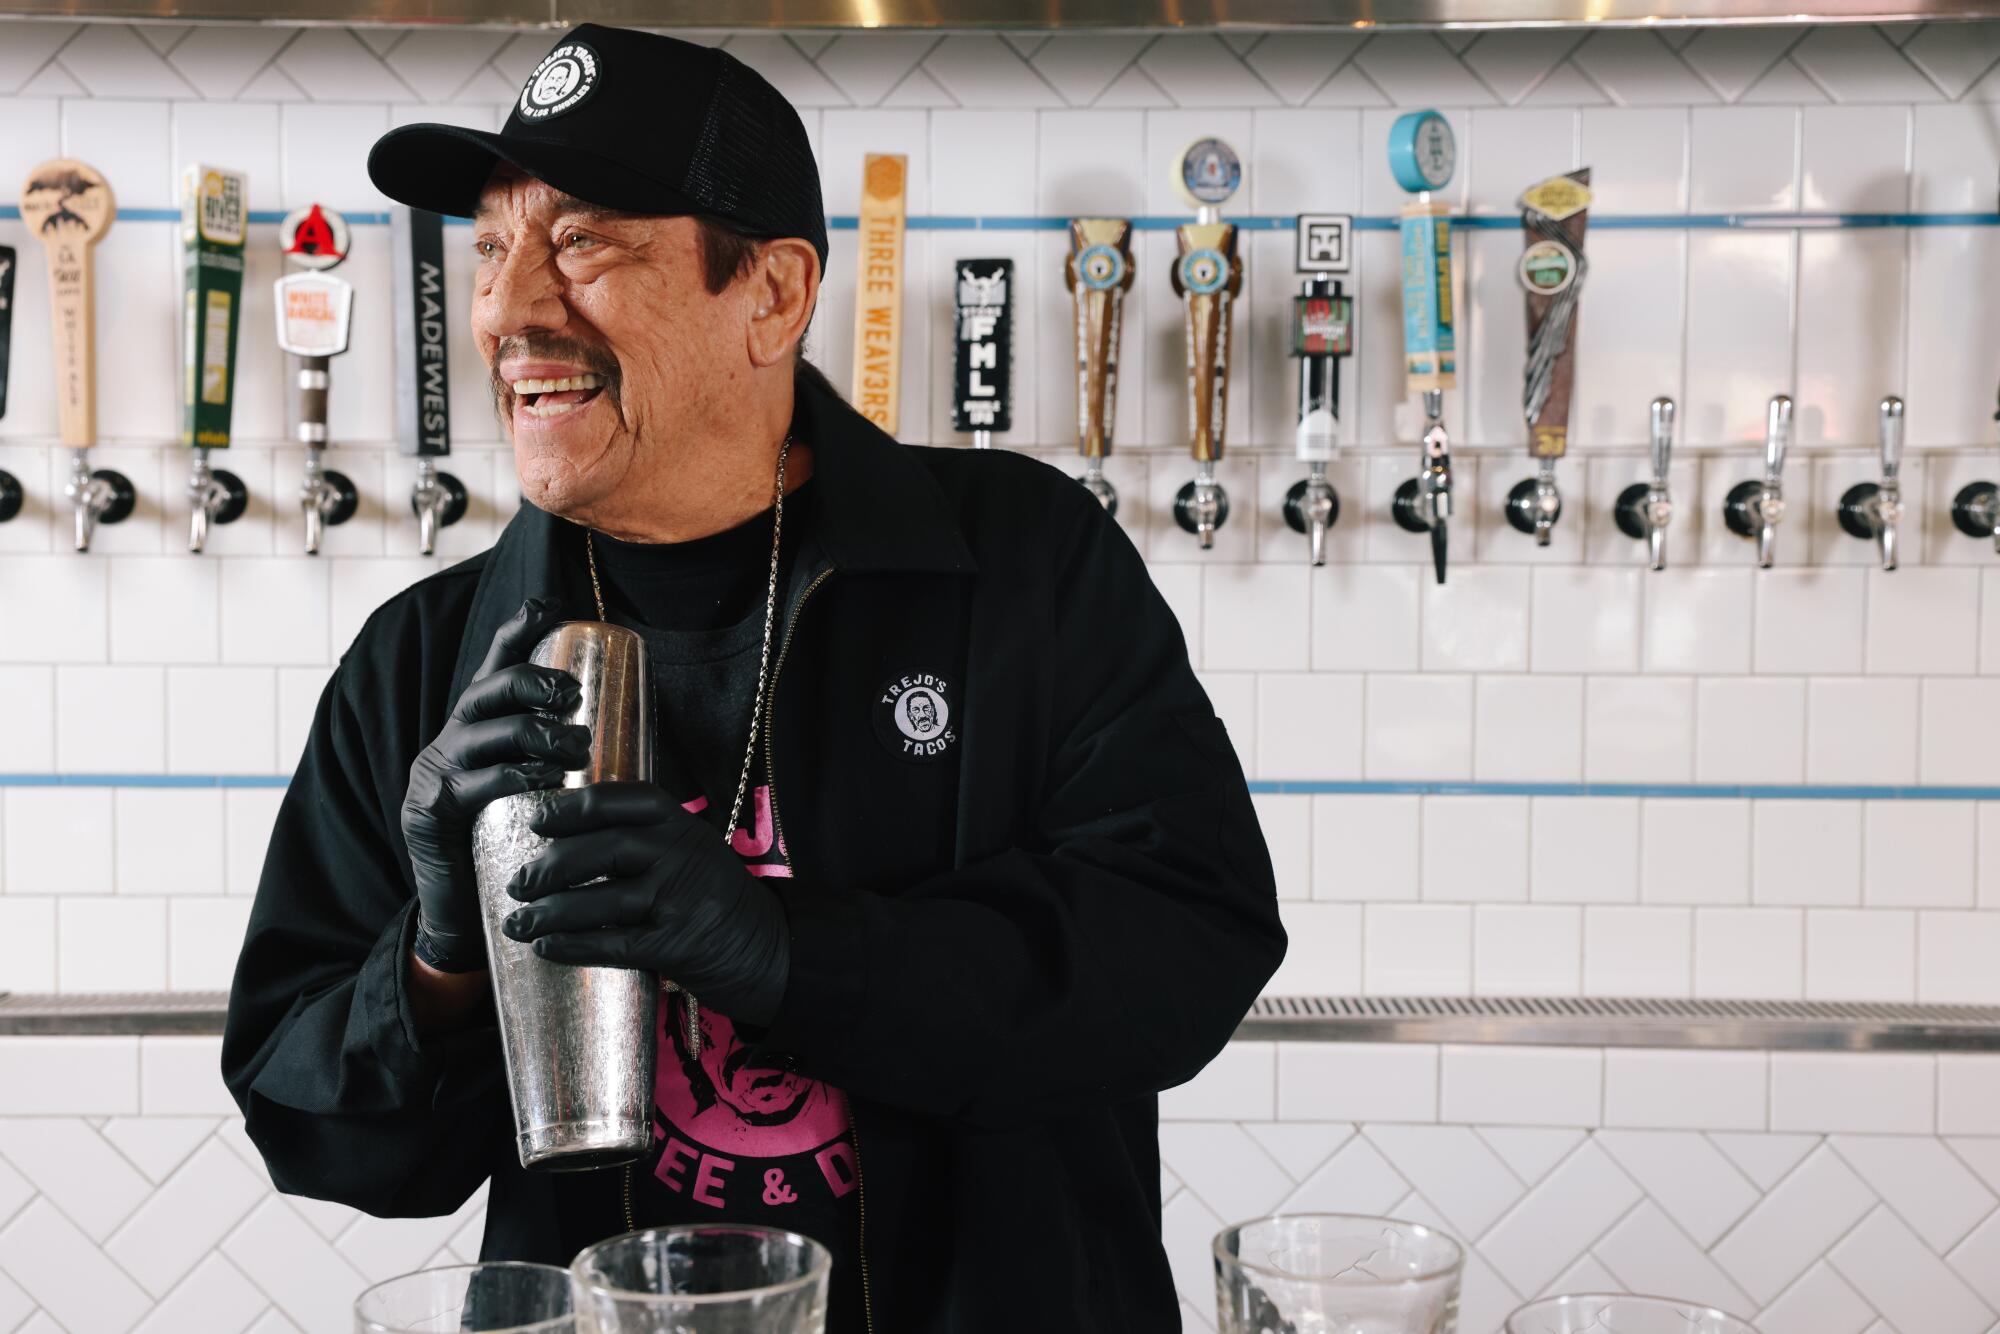 Danny Trejo smiles and holds a cocktail shaker in front of a row of beer taps